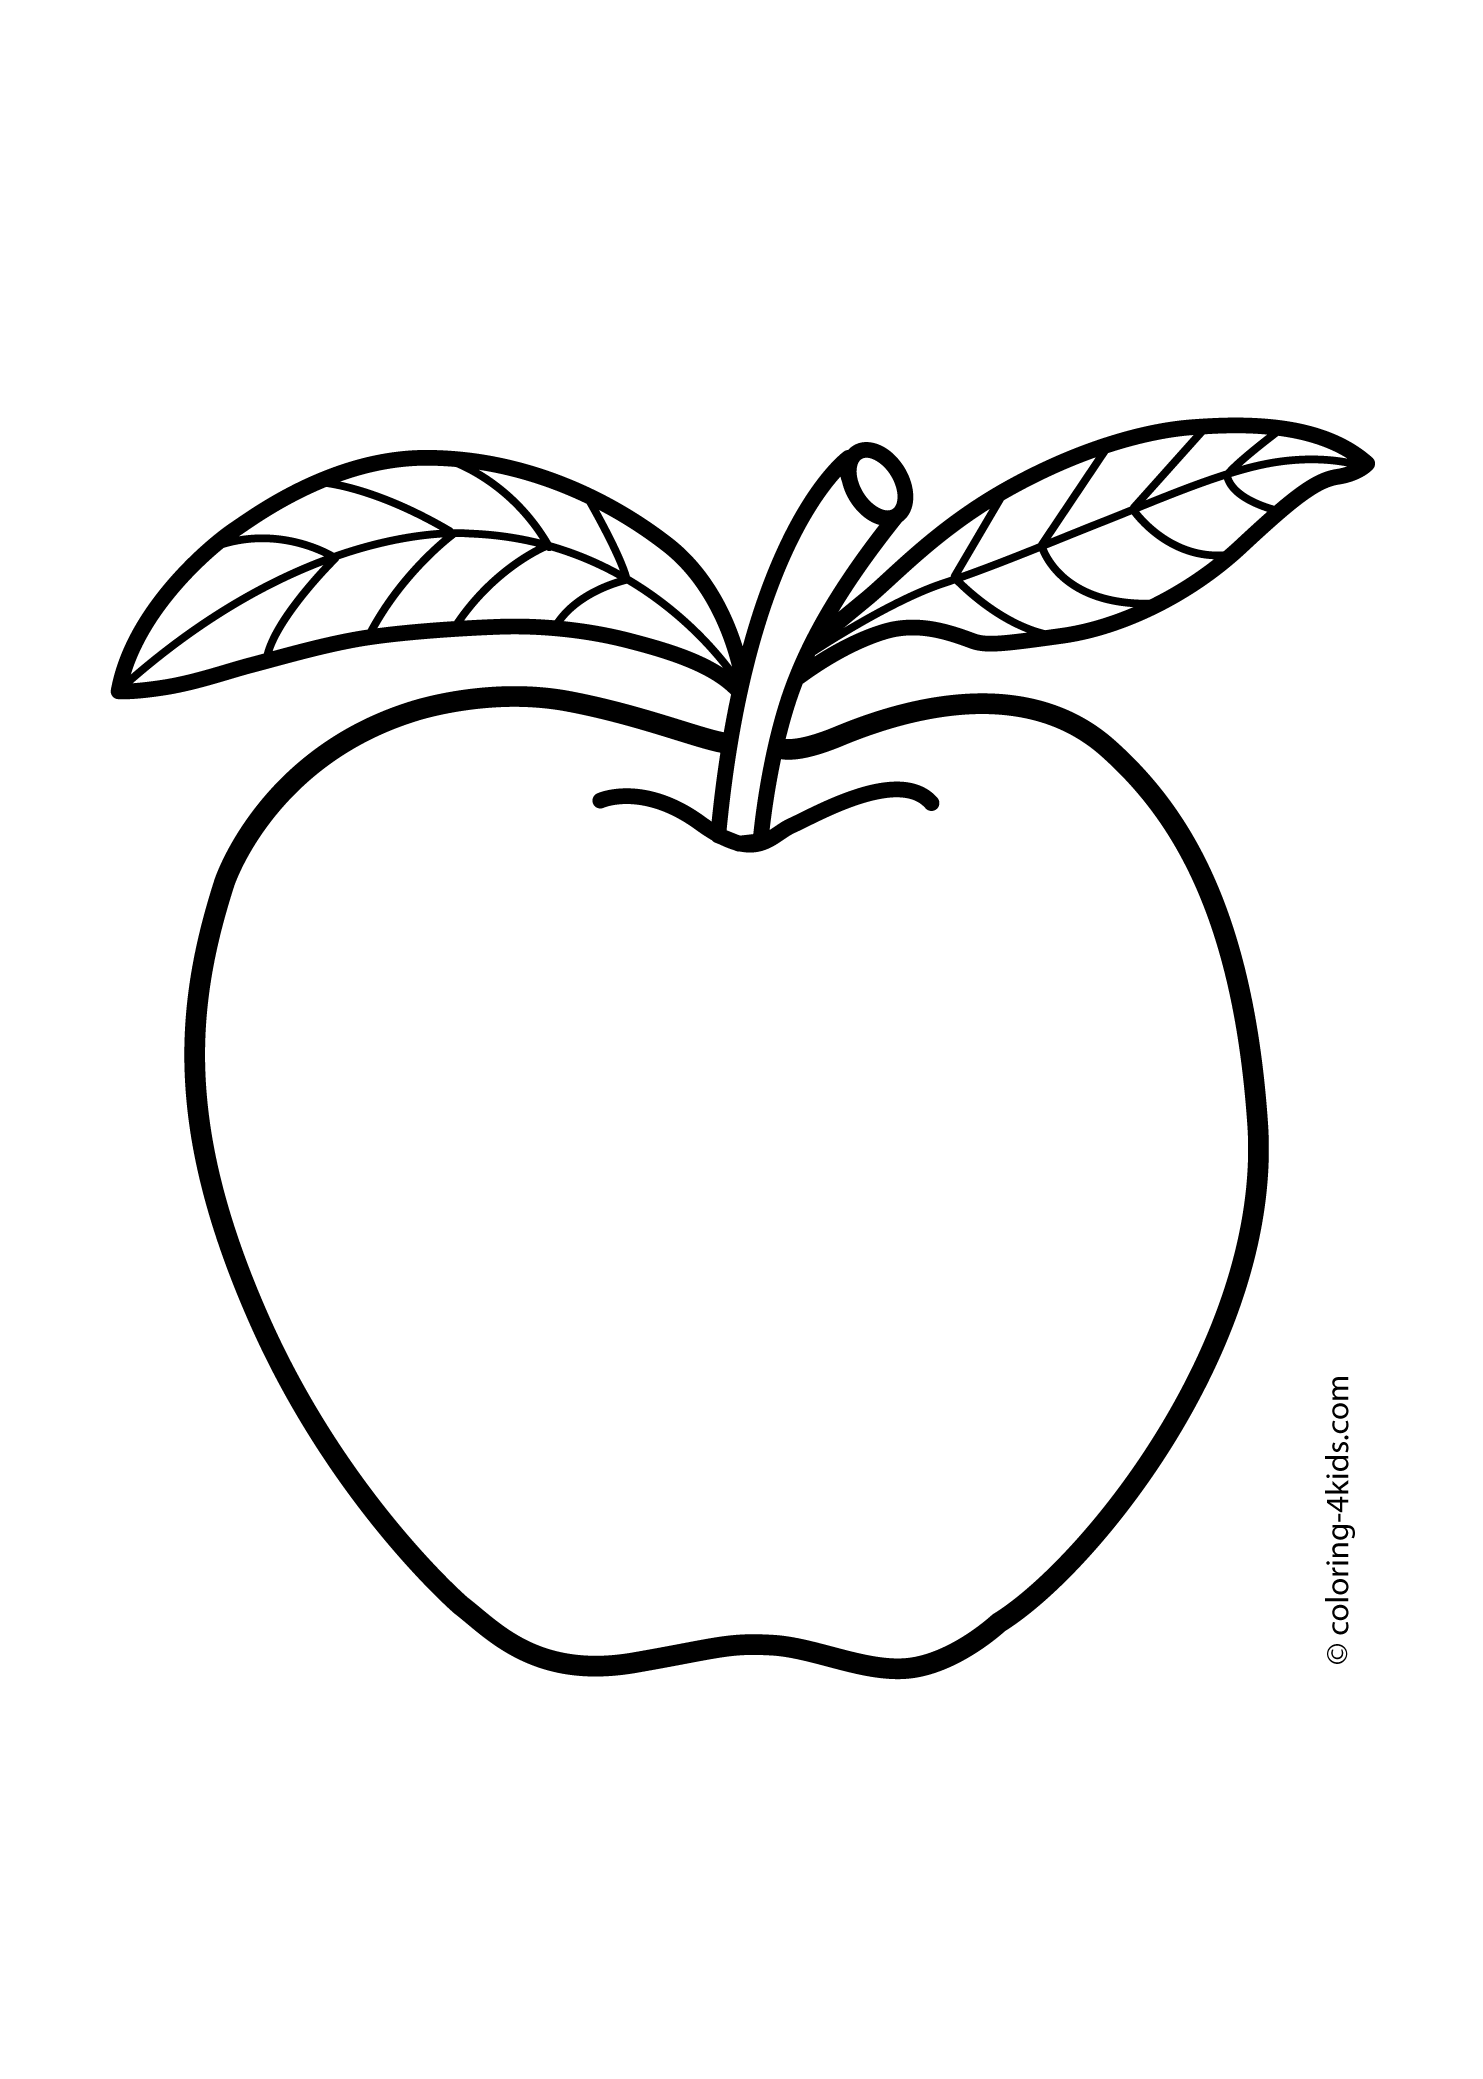 colouring images of apple two apple fruits coloring pages simple for kids printable colouring apple images of 